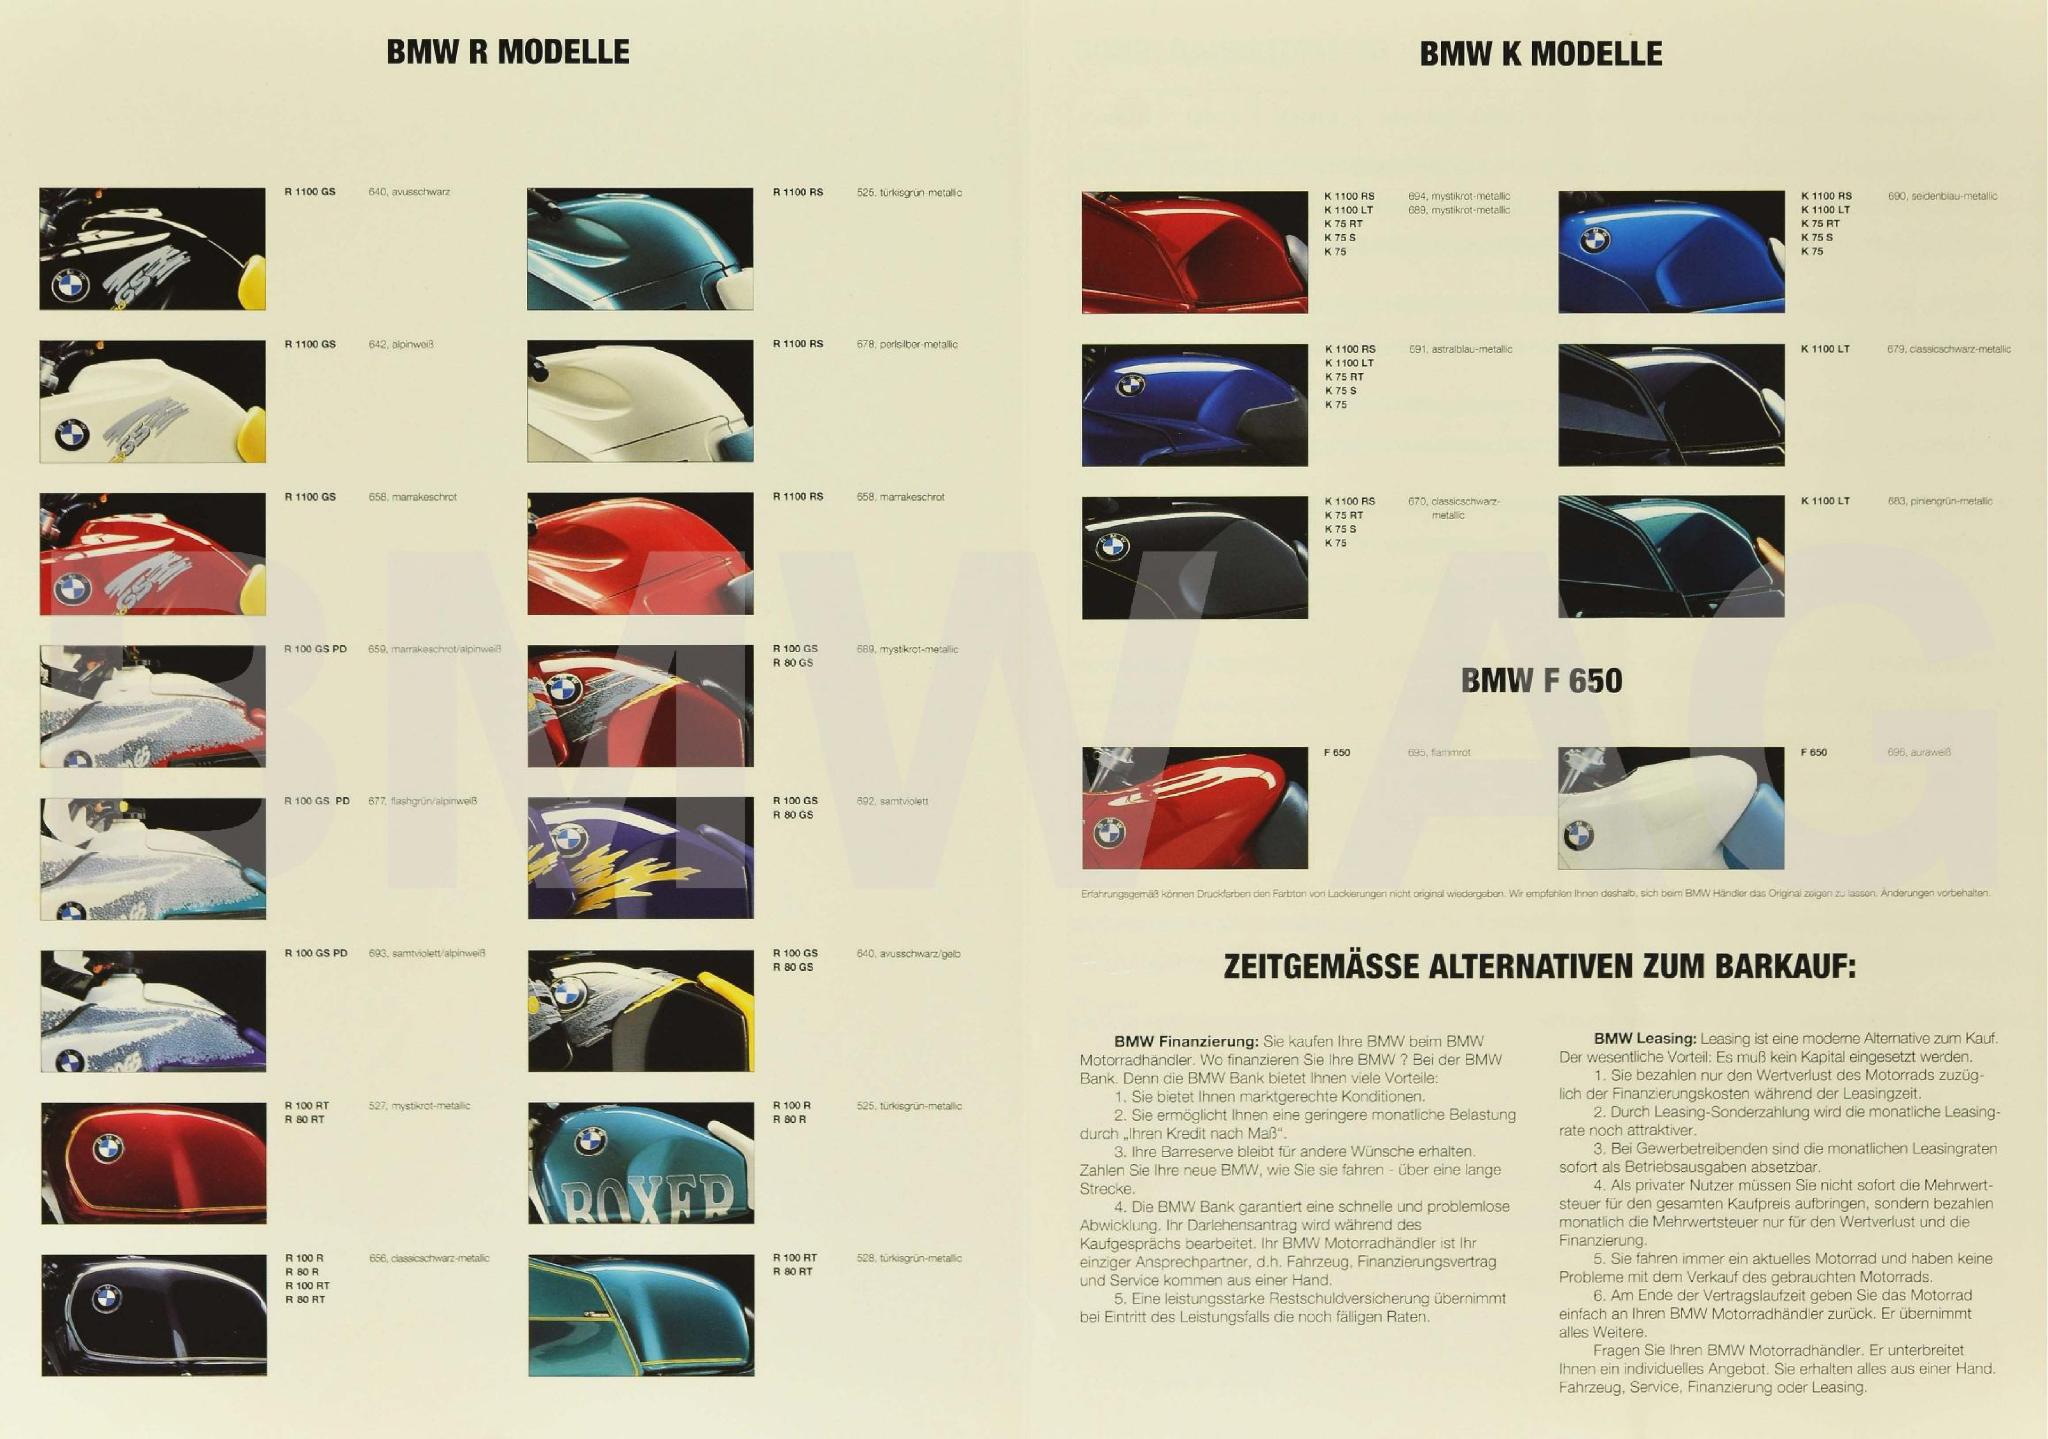 Colors used on BMW Motorcycles in 1994